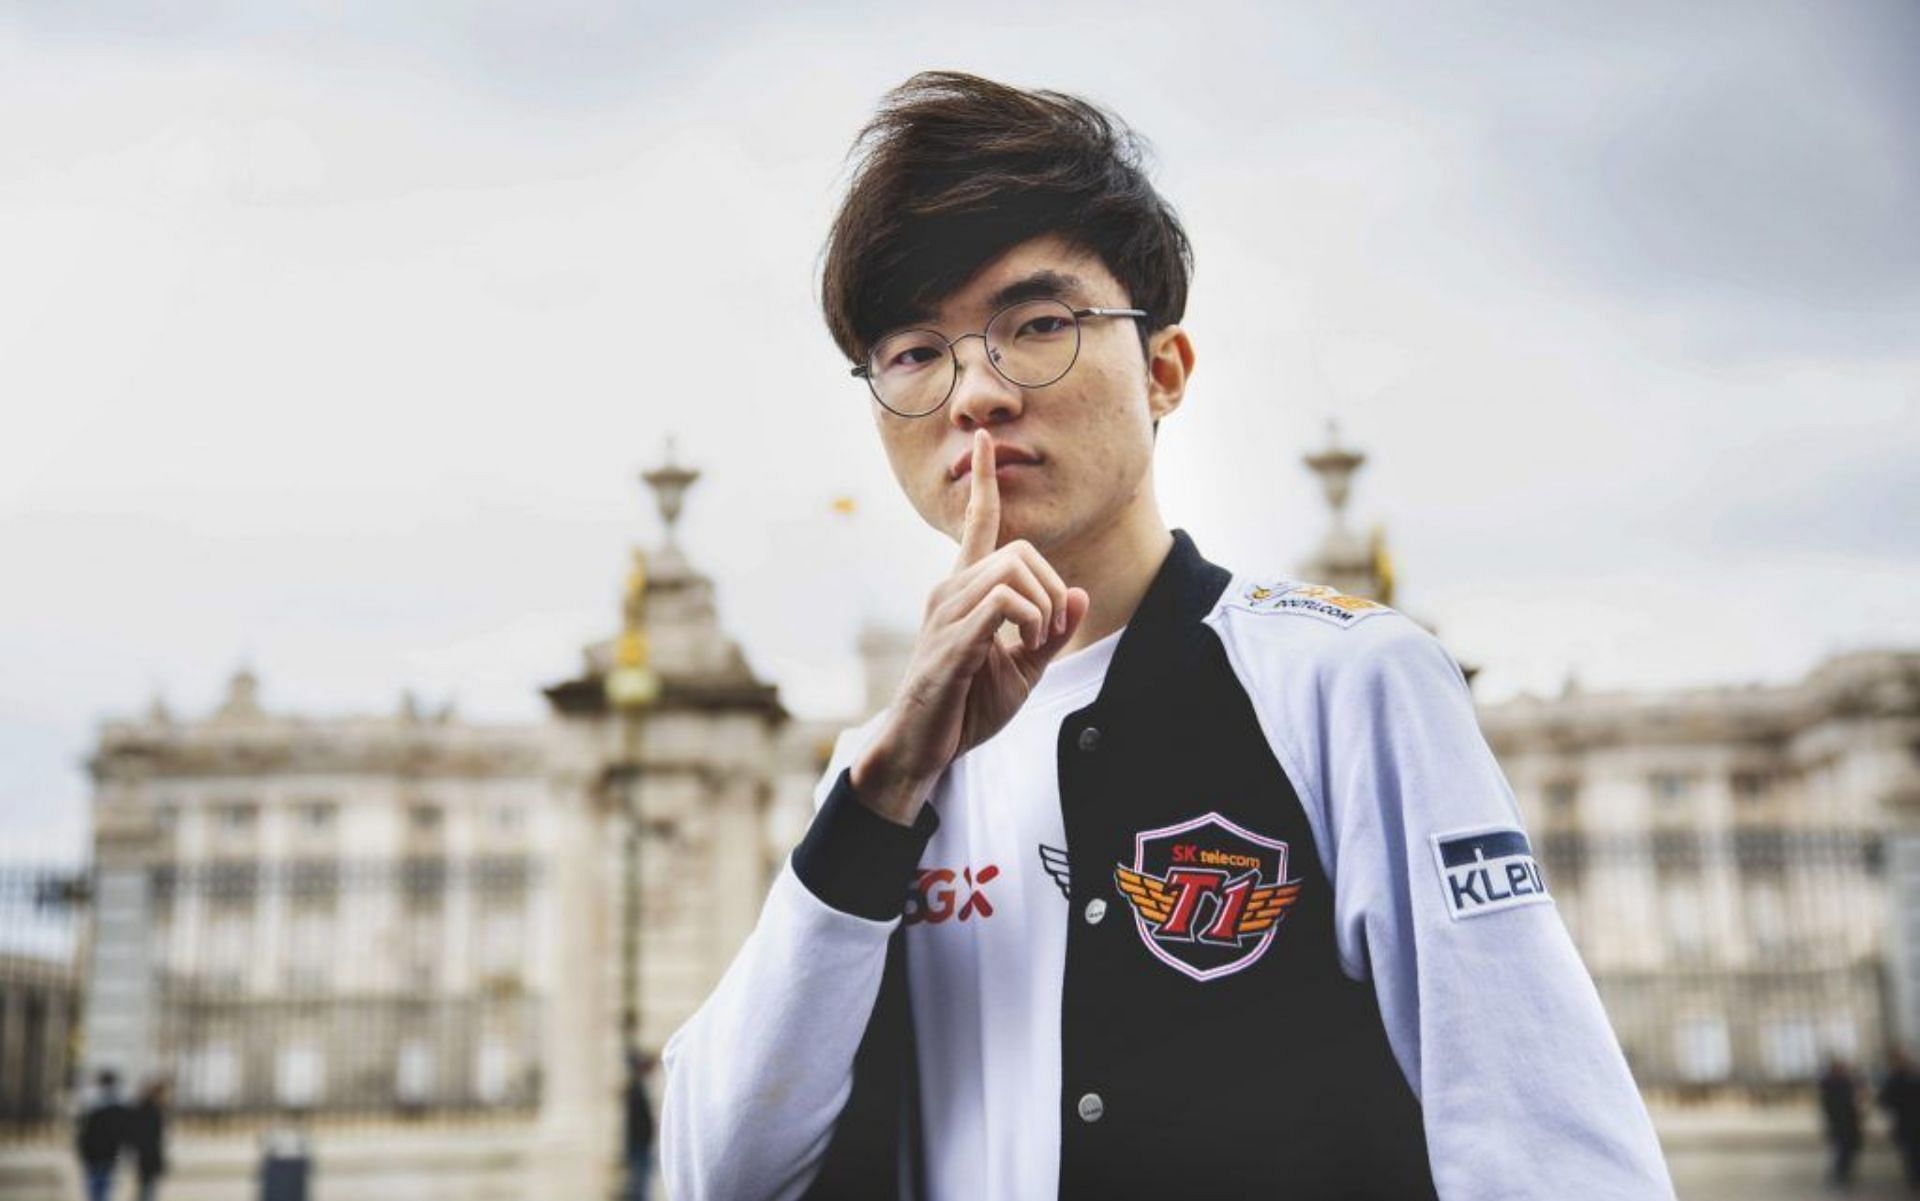 Faker has hit another major milestone in his illustrious career (Image via Riot Games)